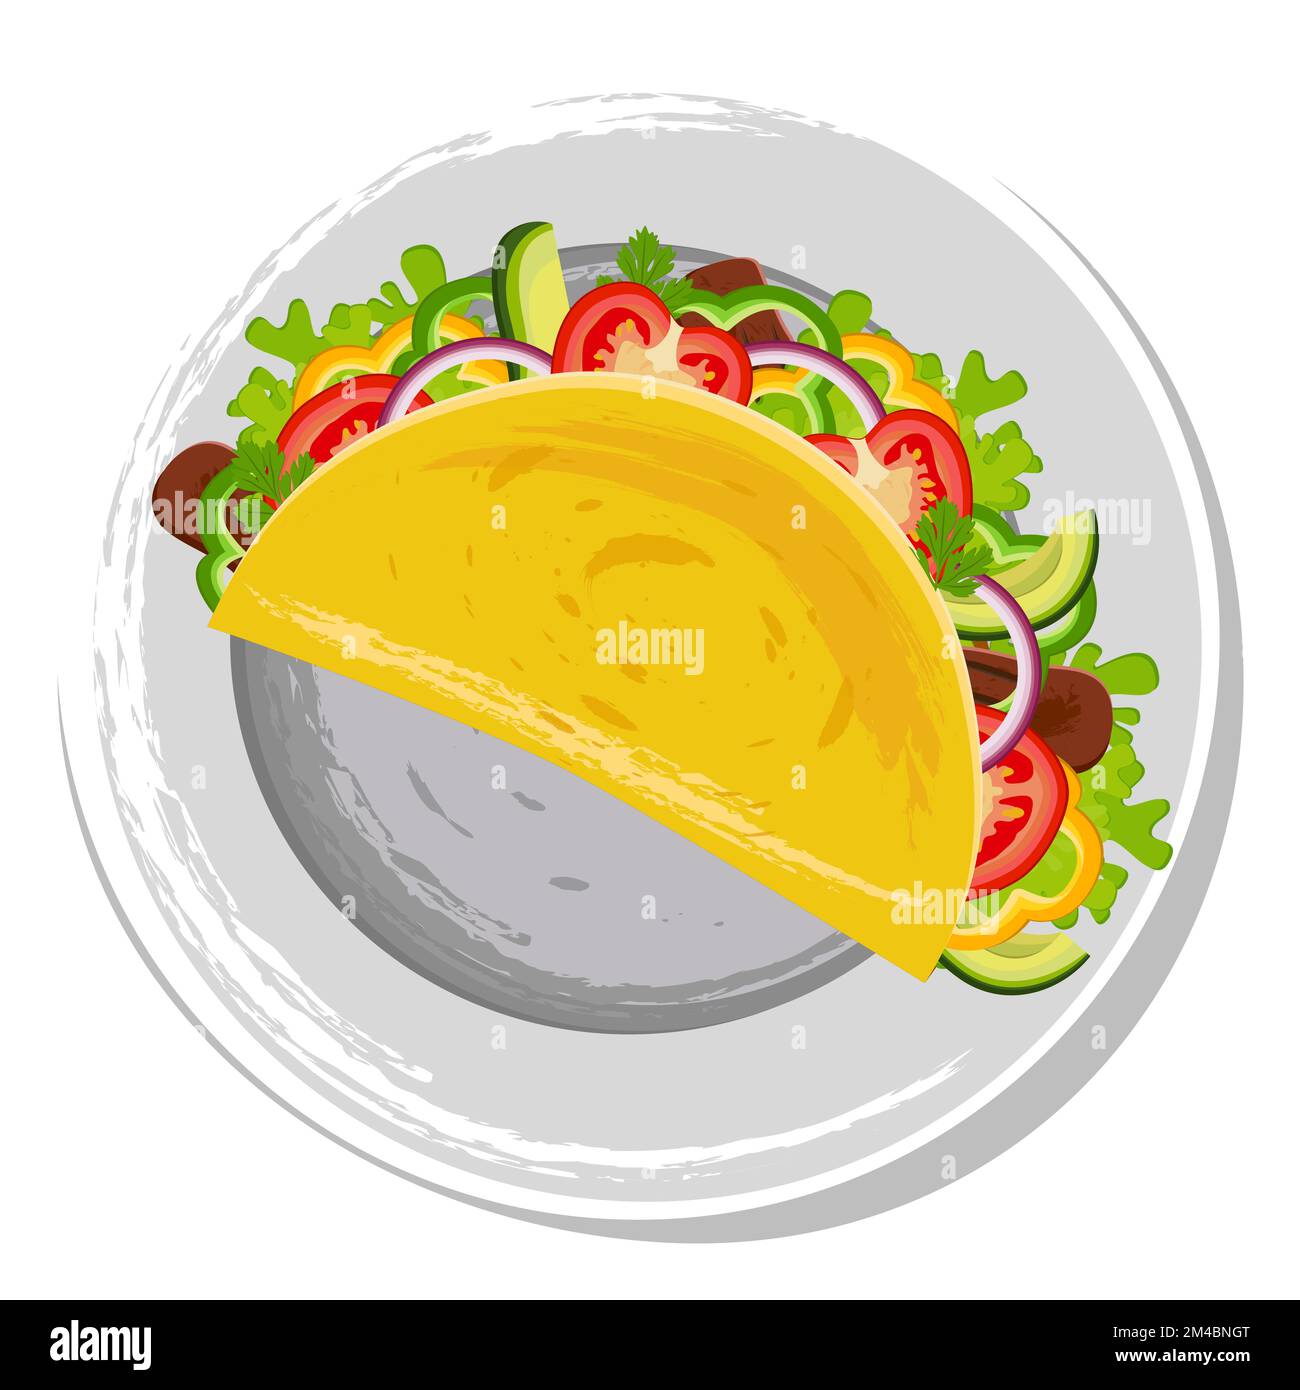 Tacos. Traditional Mexican fast food. Latin American cuisine. Stock Vector